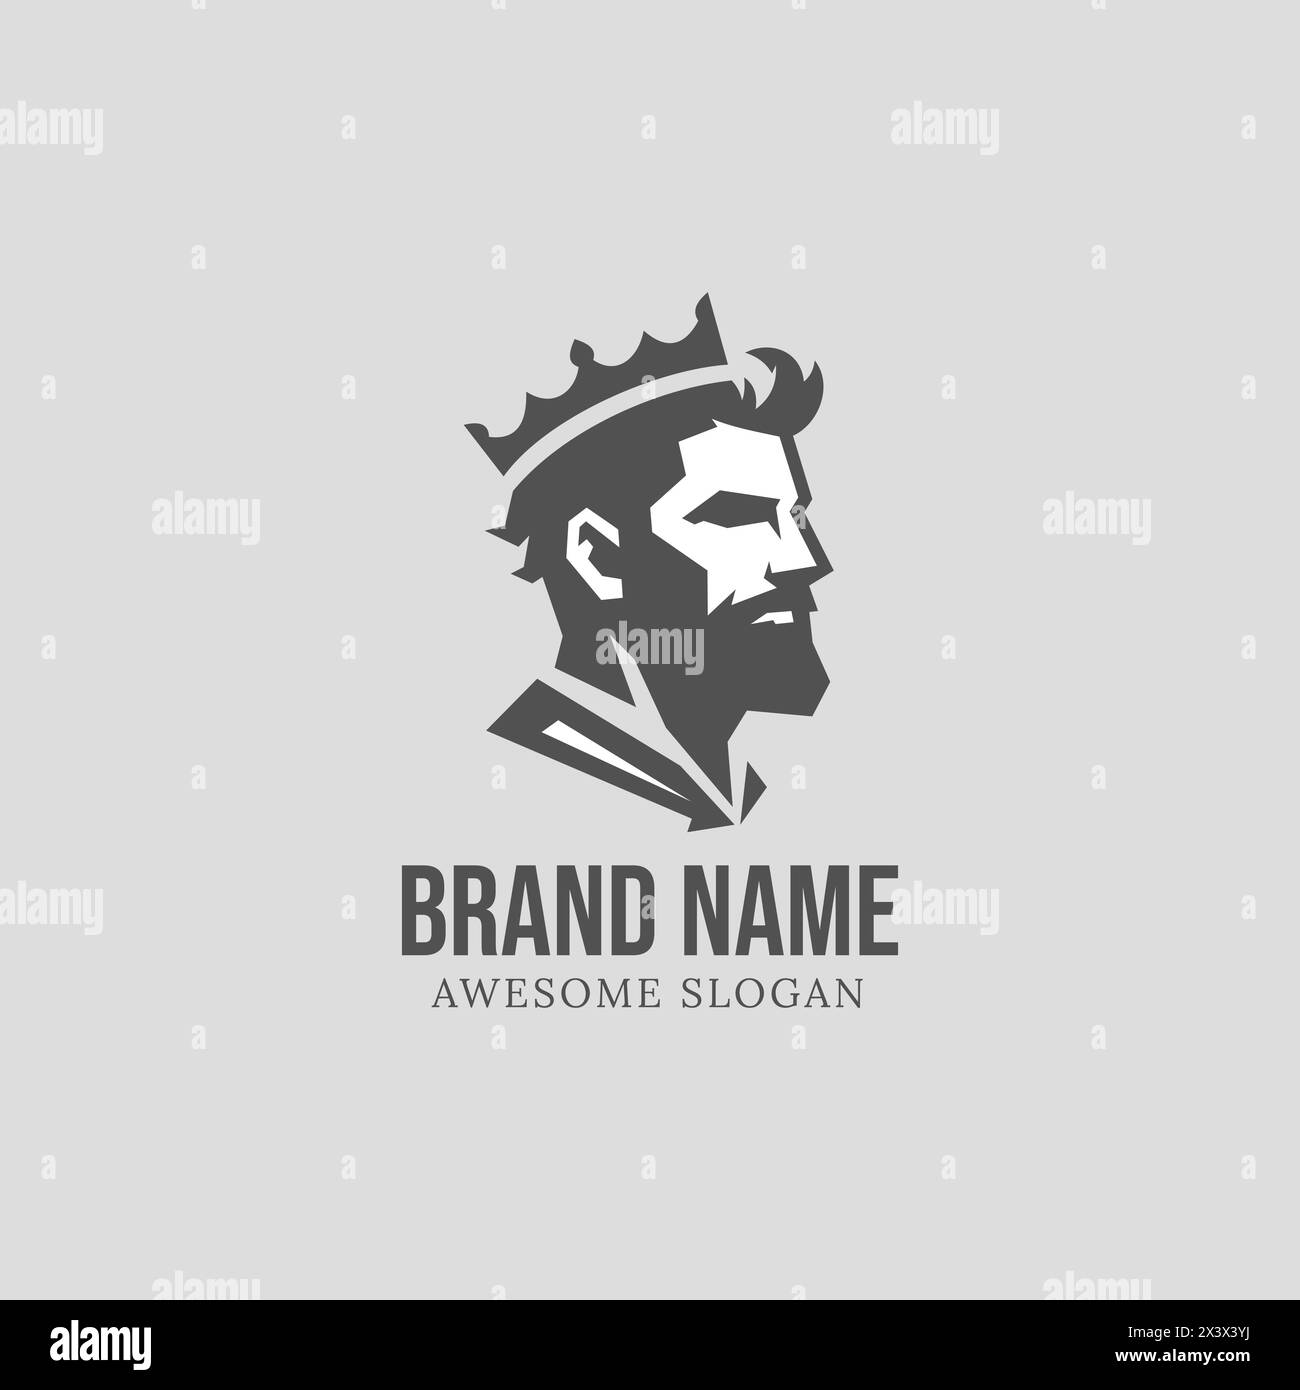 Man wearing king crown hat logo design. Masculine styled brand identity template. Stock Vector